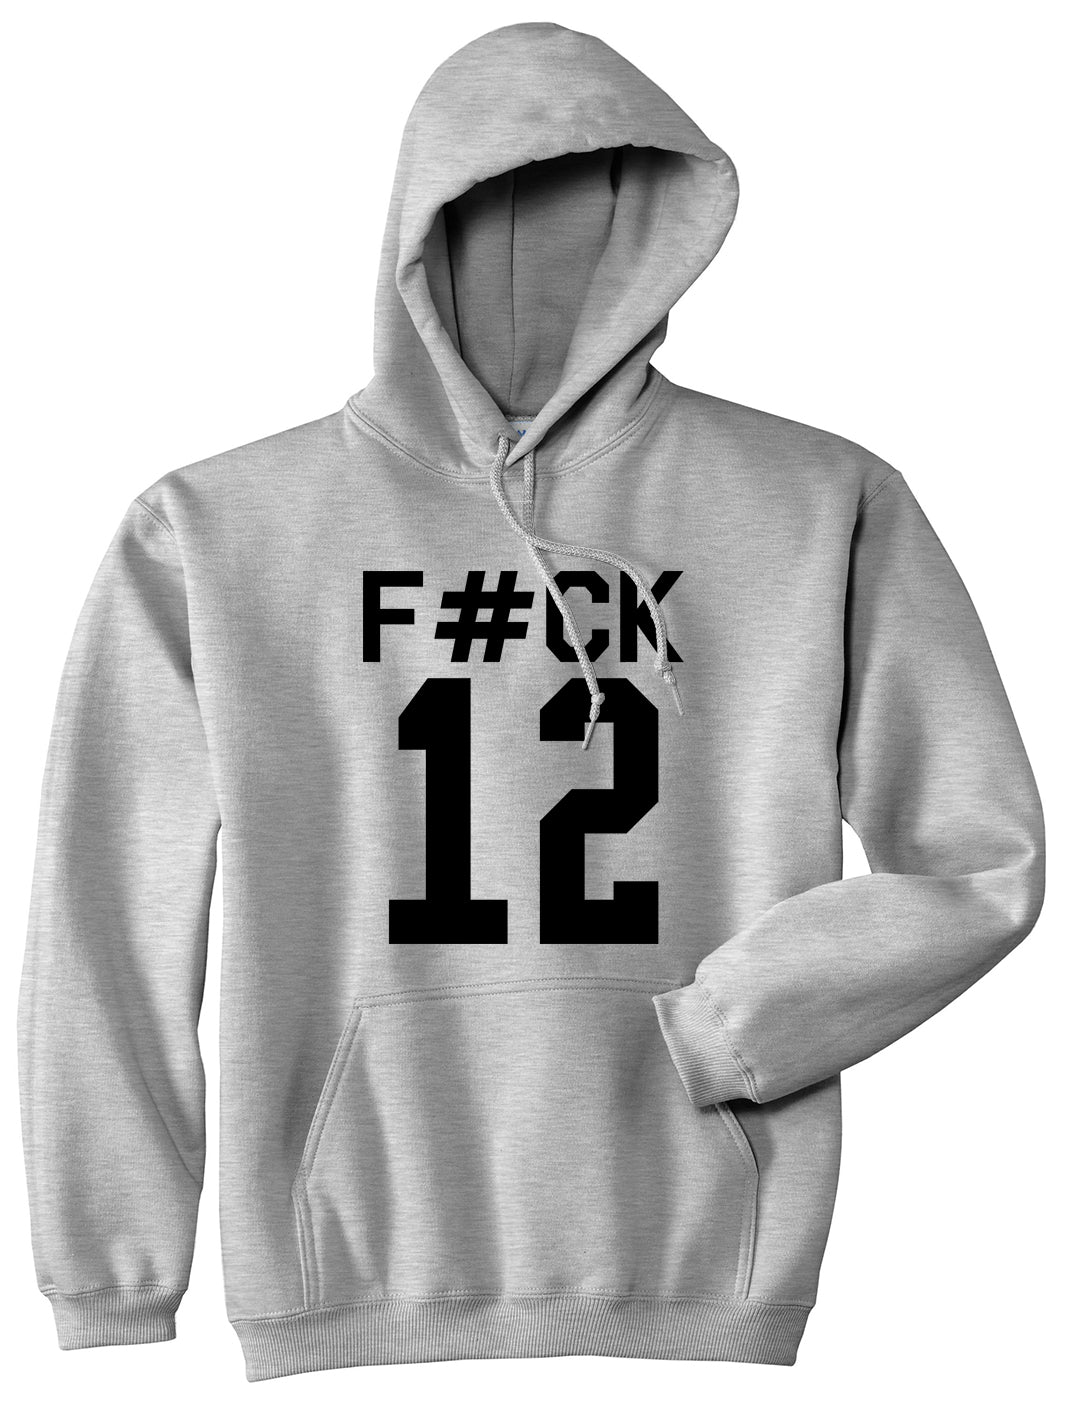 Fck 12 Police Brutality Mens Pullover Hoodie Grey by Kings Of NY